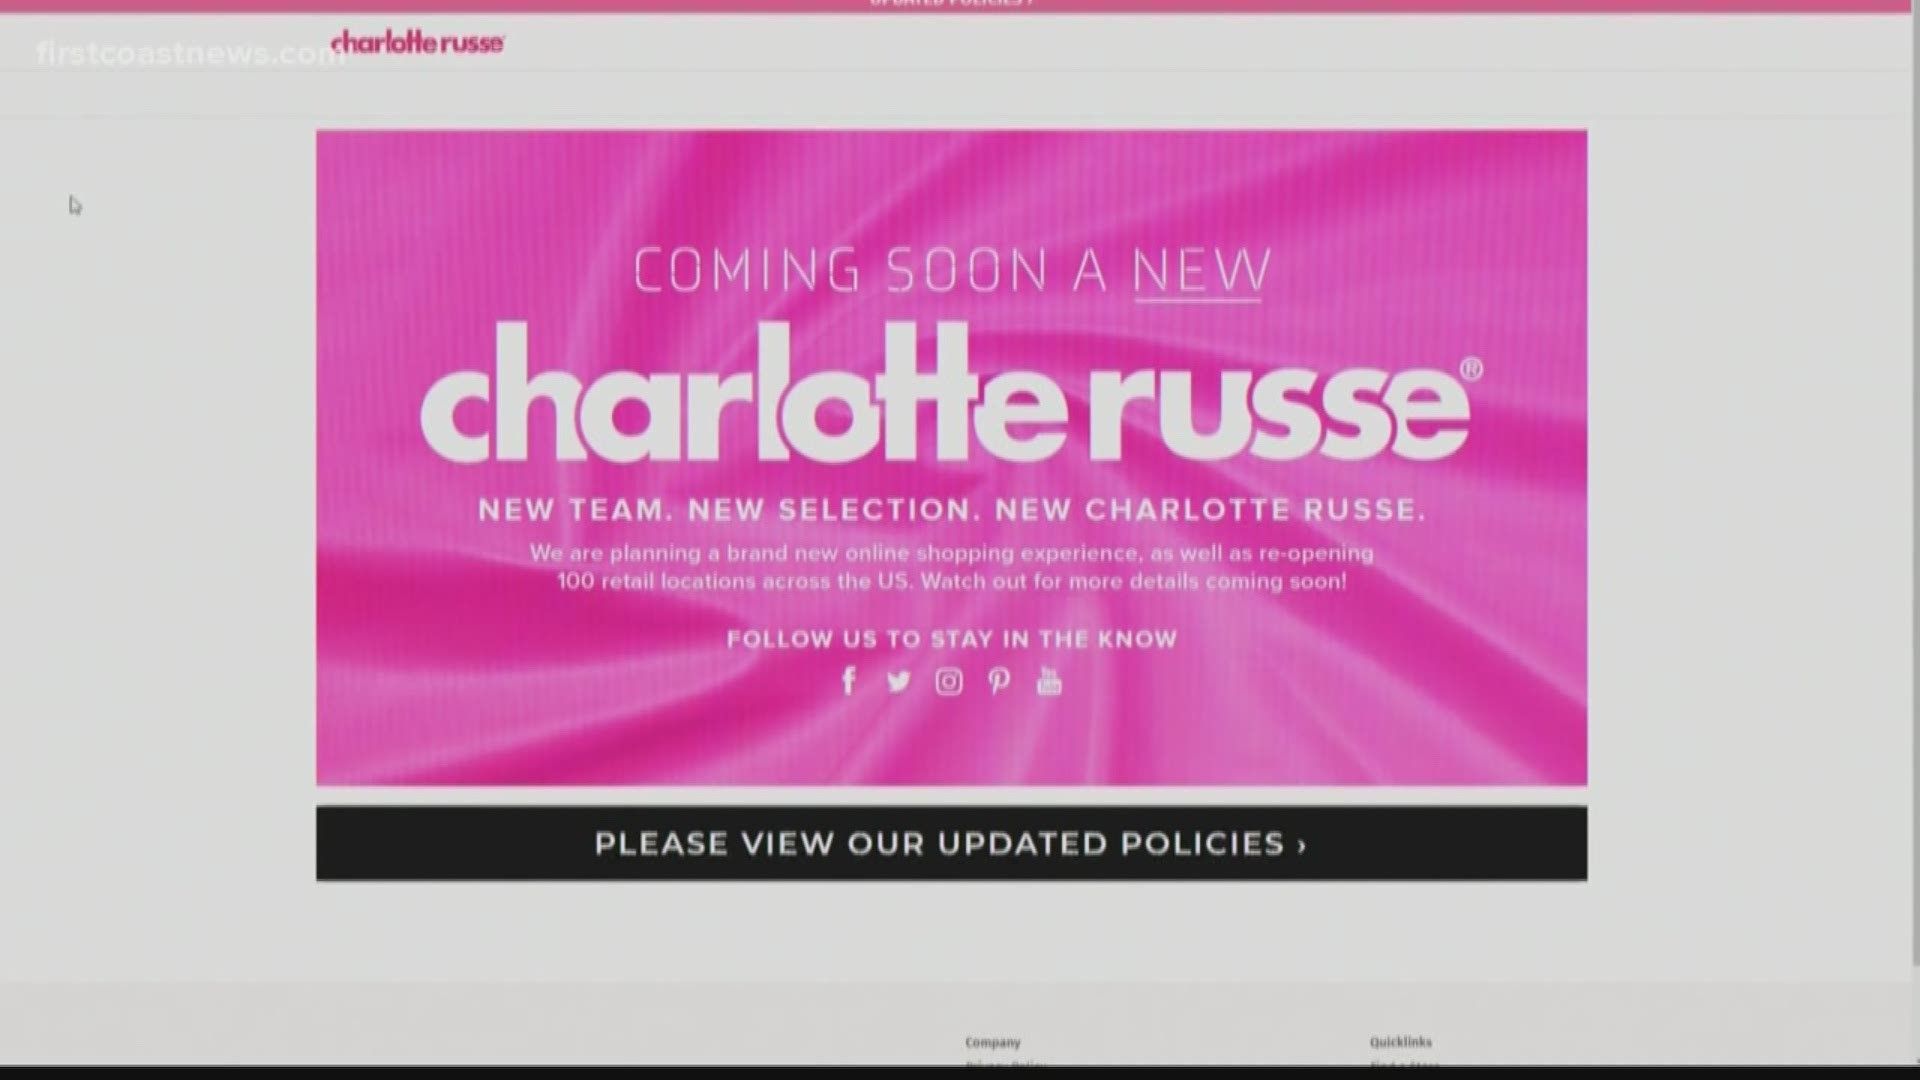 Charlotte Russe posted on its website that it was reopening 100 retail locations across the US and that it would be rebranding its online website.